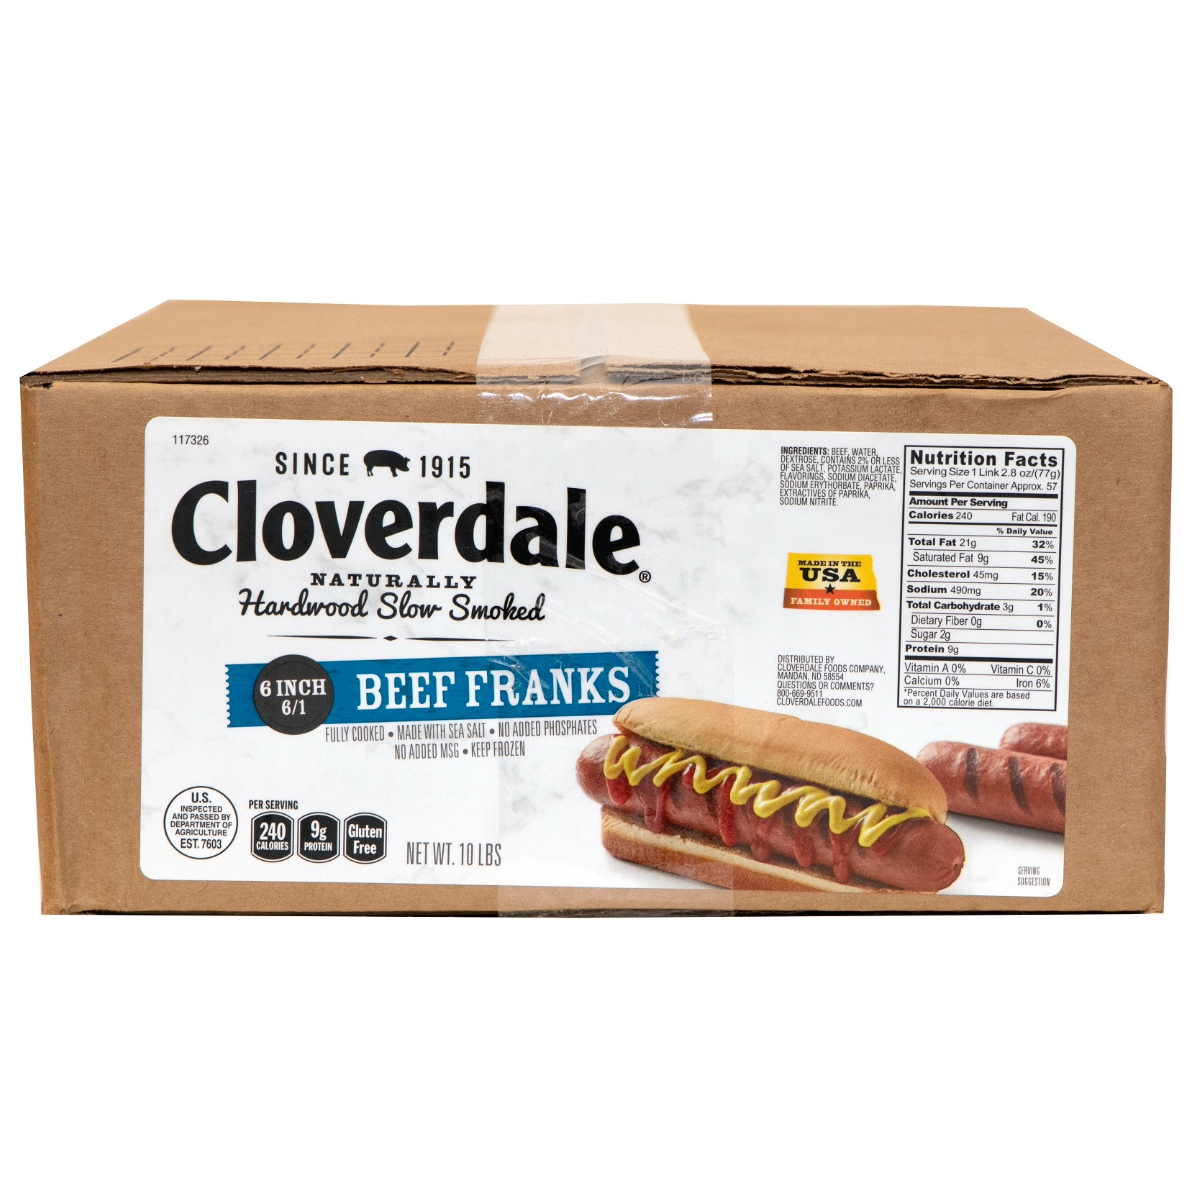 CLOVERDALE BEEF HOT DOGS 6 INCH 6/1 FRANKS